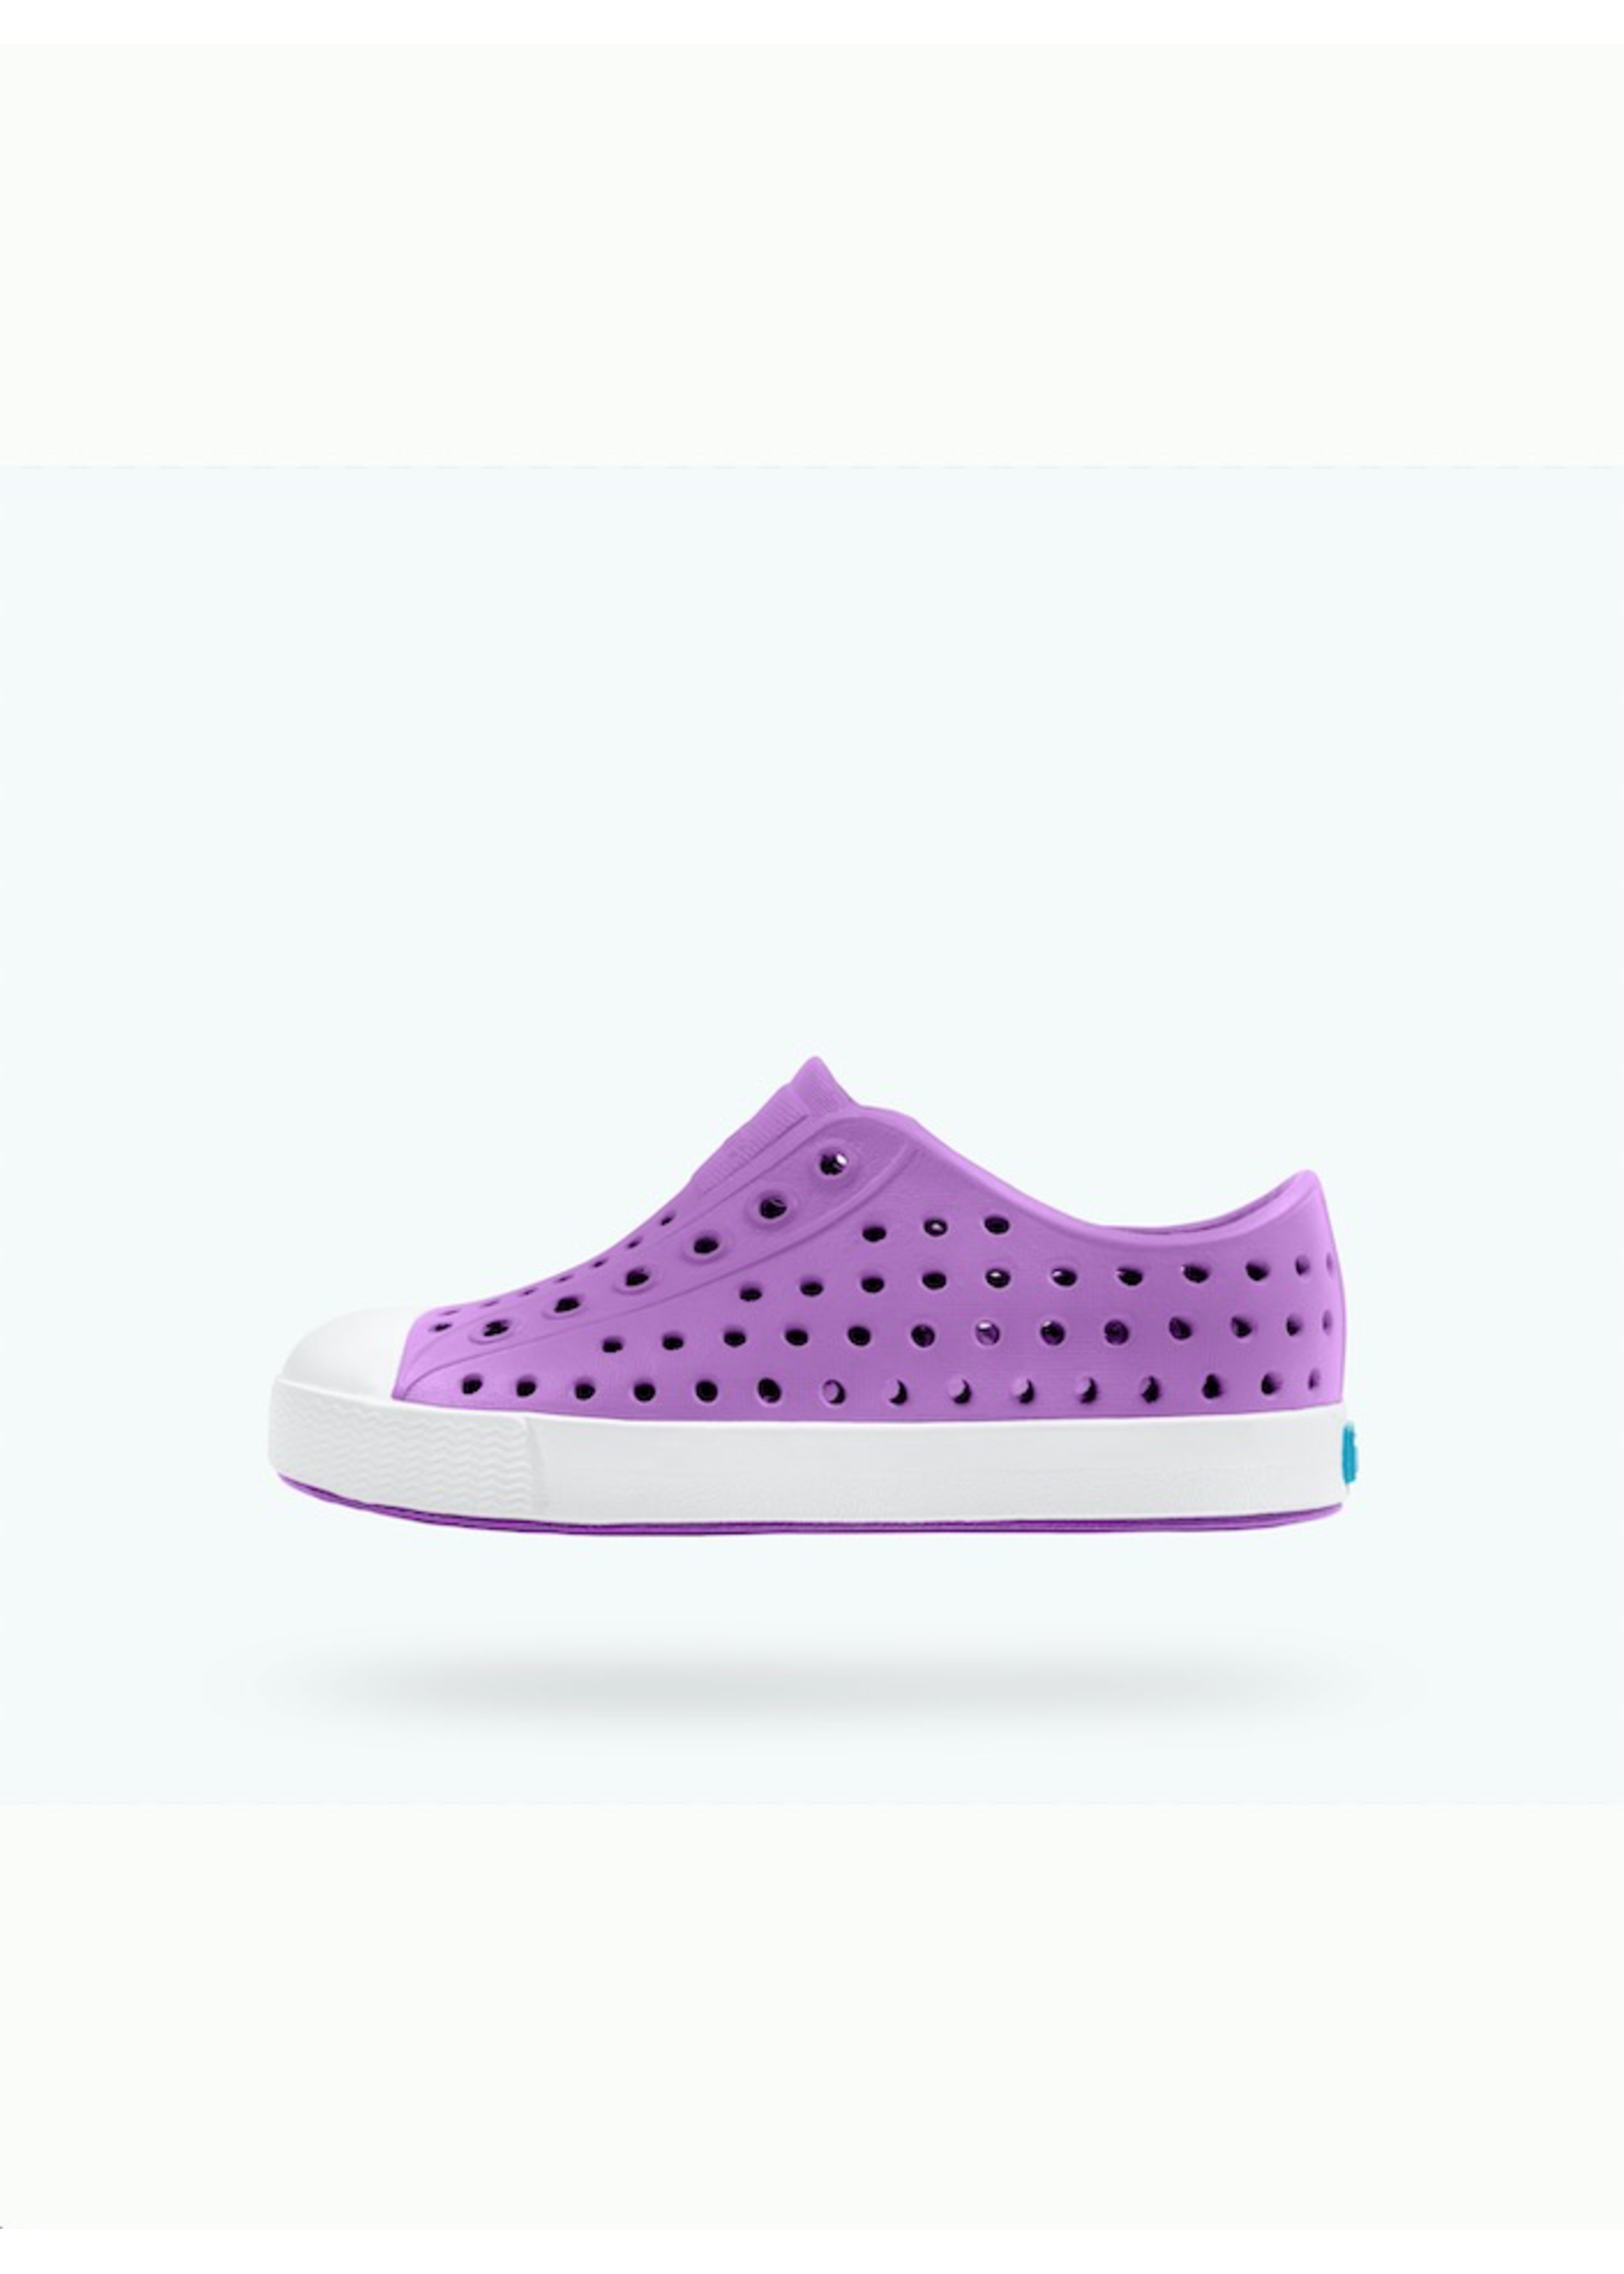 Native Shoes Native Shoes, Jefferson Youth / Junior in Starfish Purple